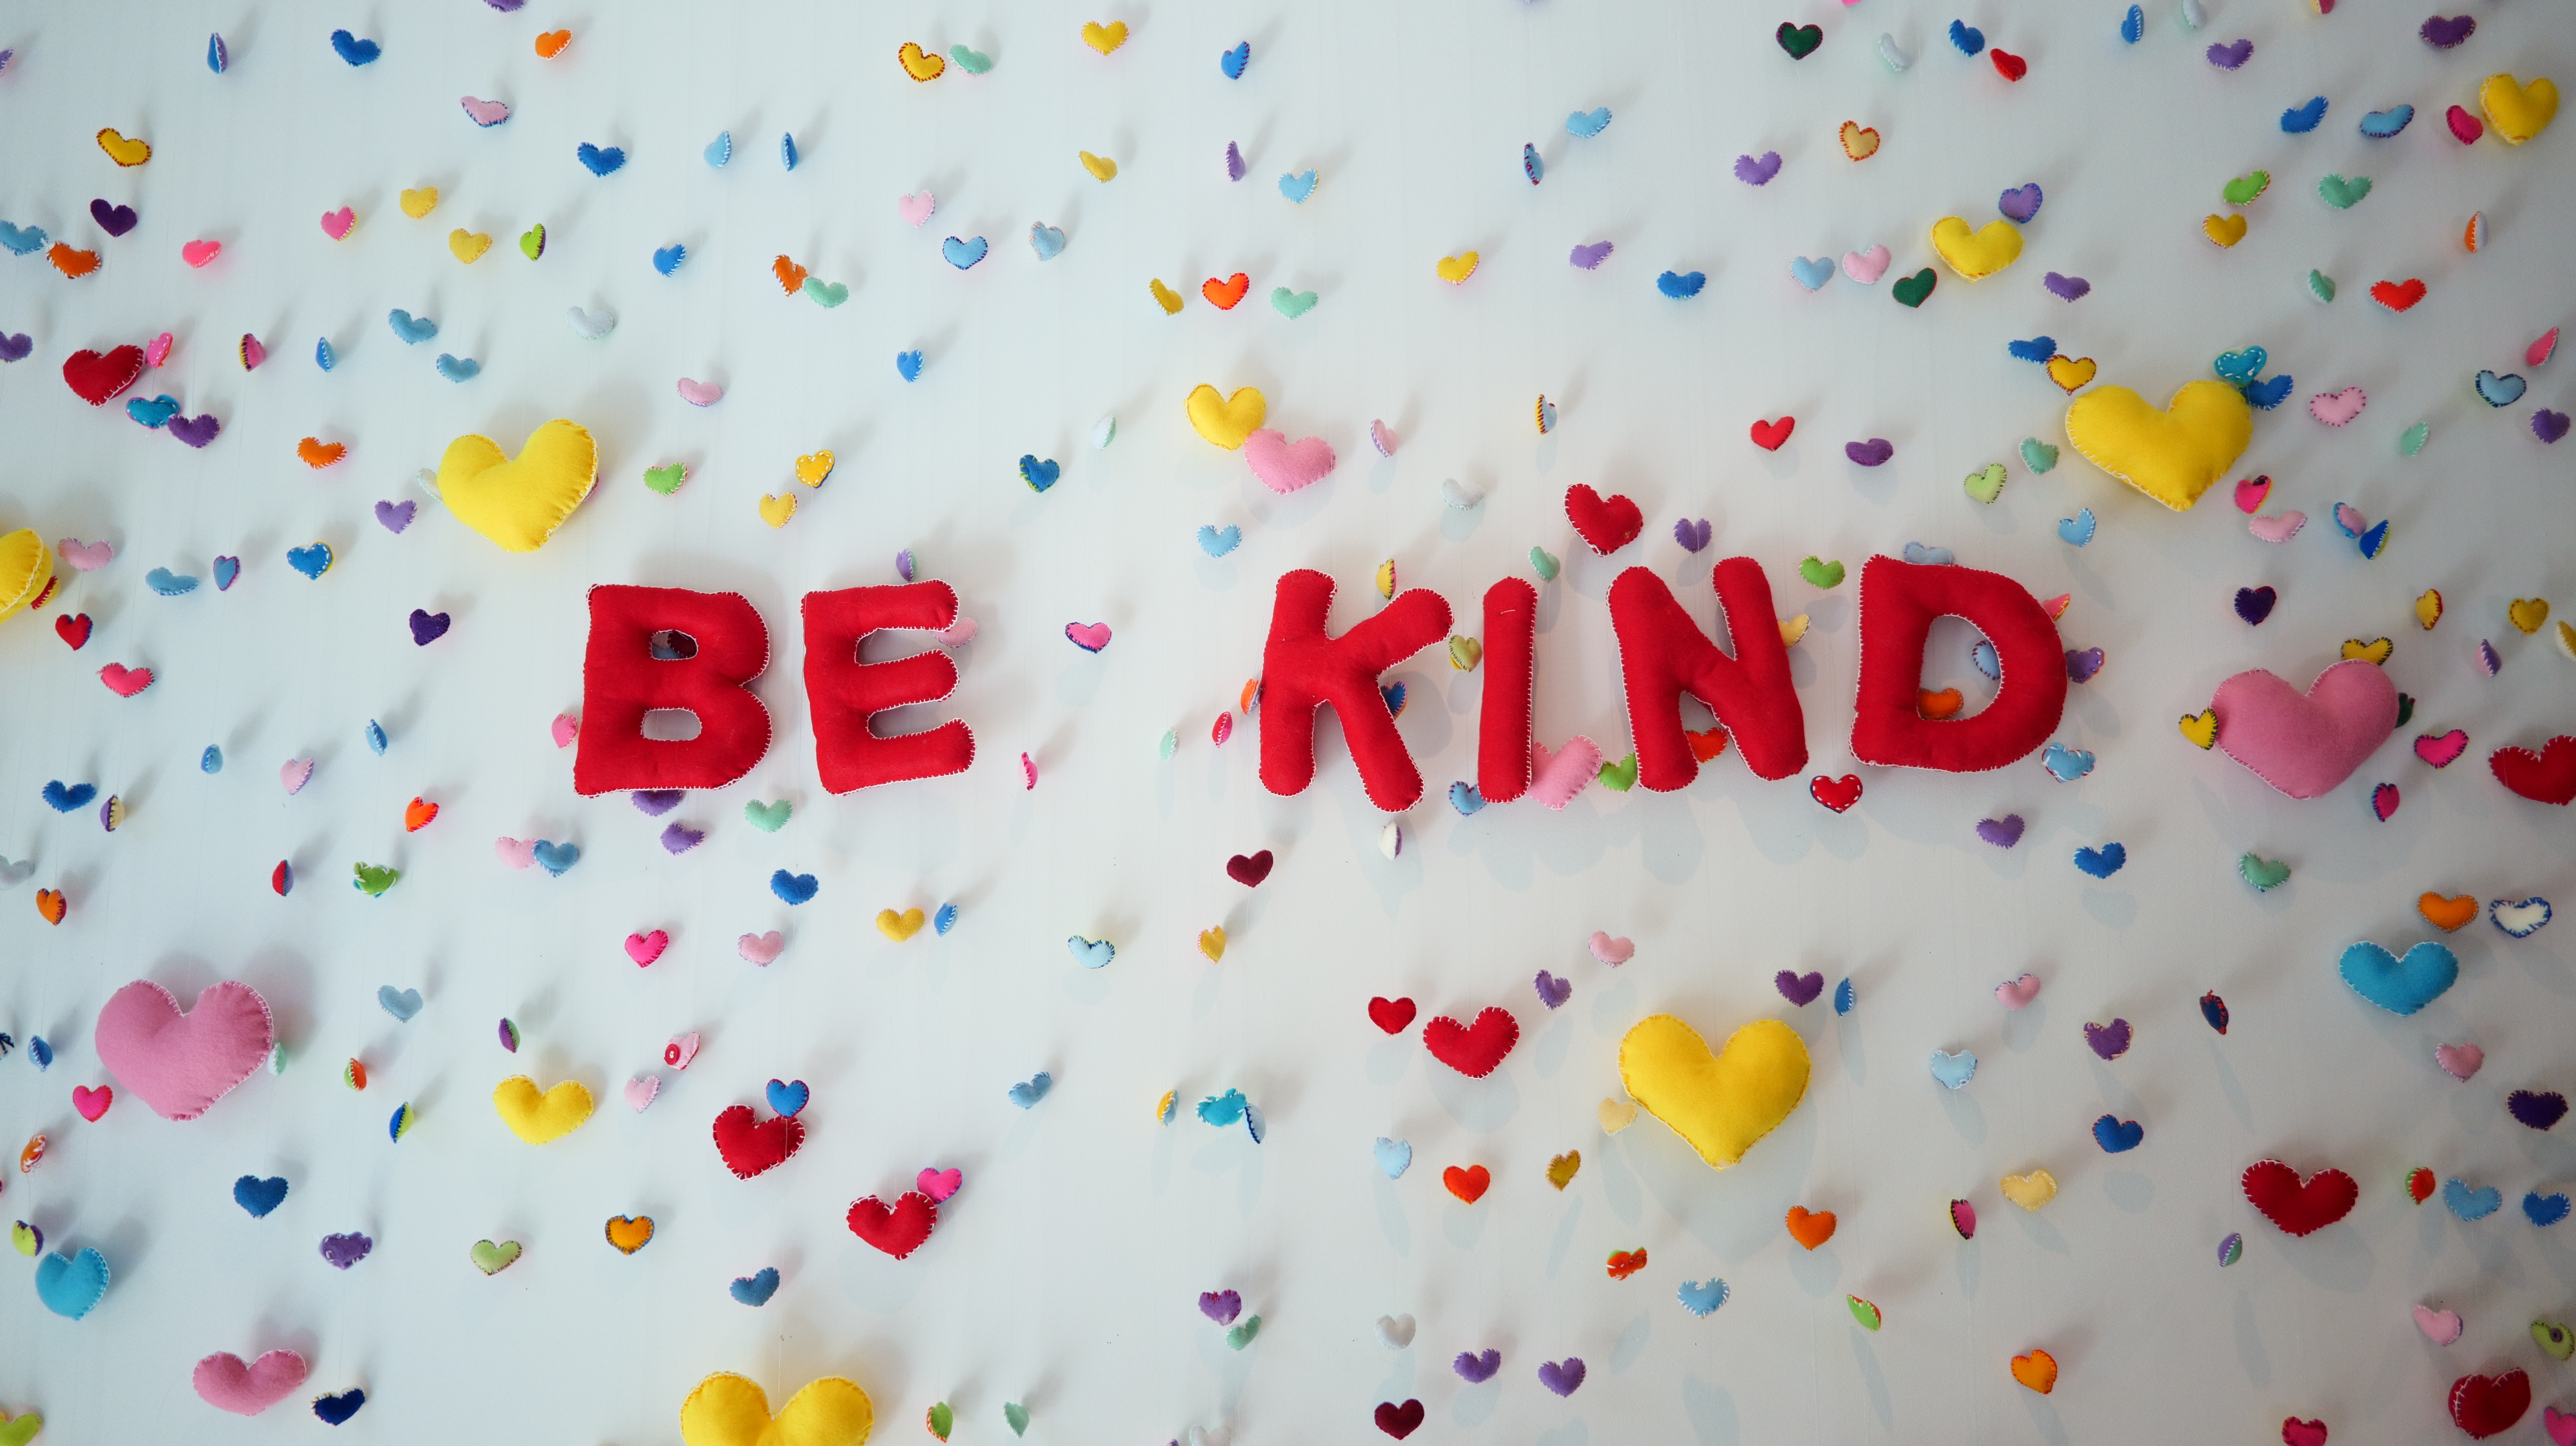 Red felt letting of 'Be Kind' written and surrounded by many small multi-coloured felt hearts